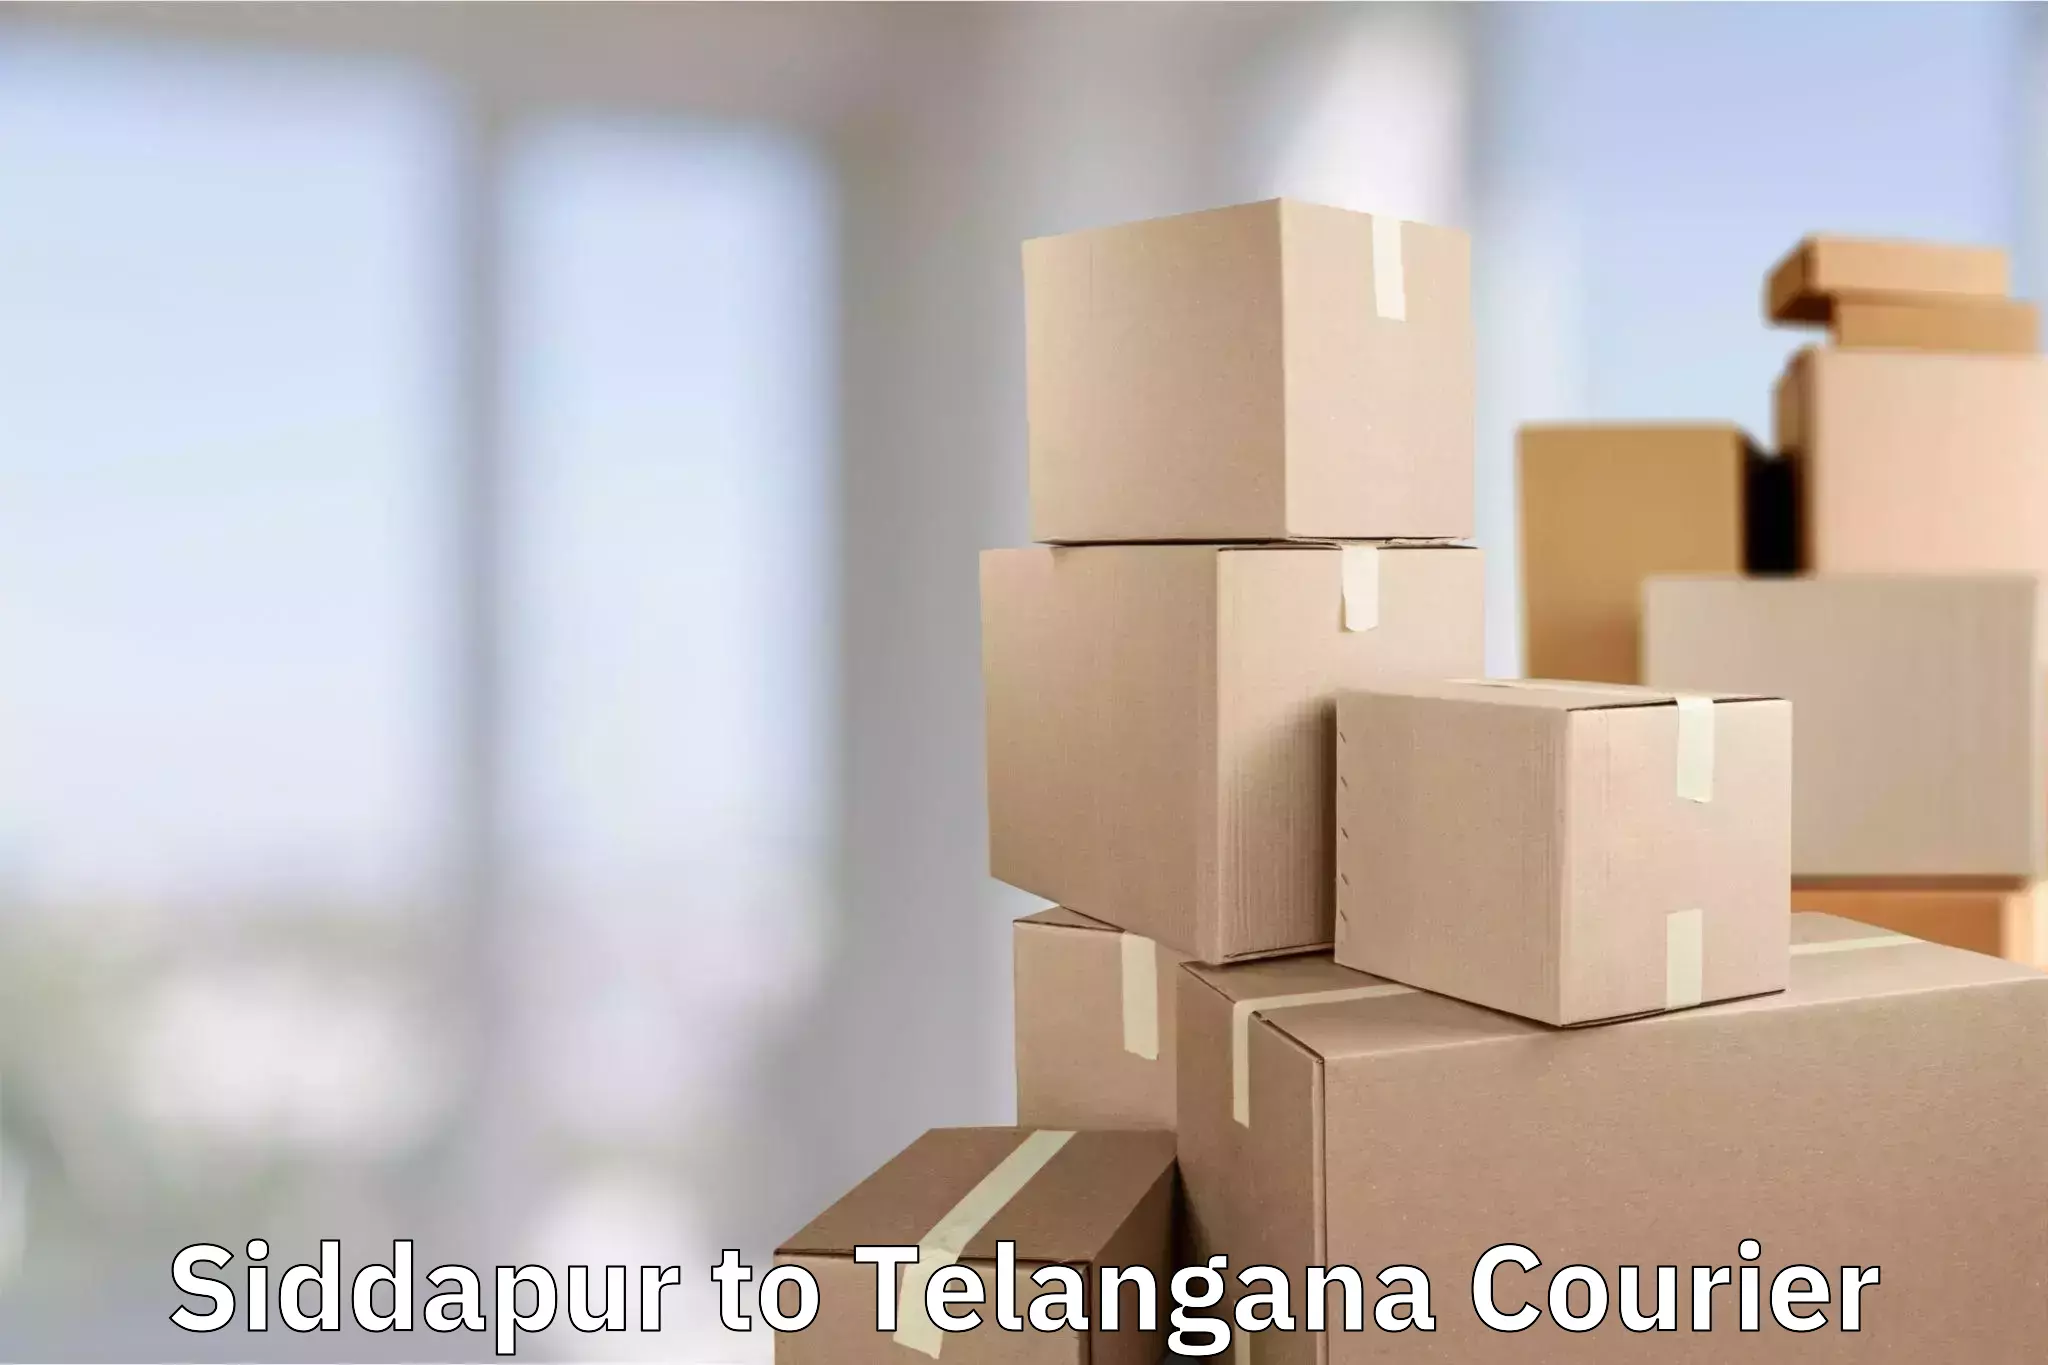 Luggage shipping planner Siddapur to Manneguda